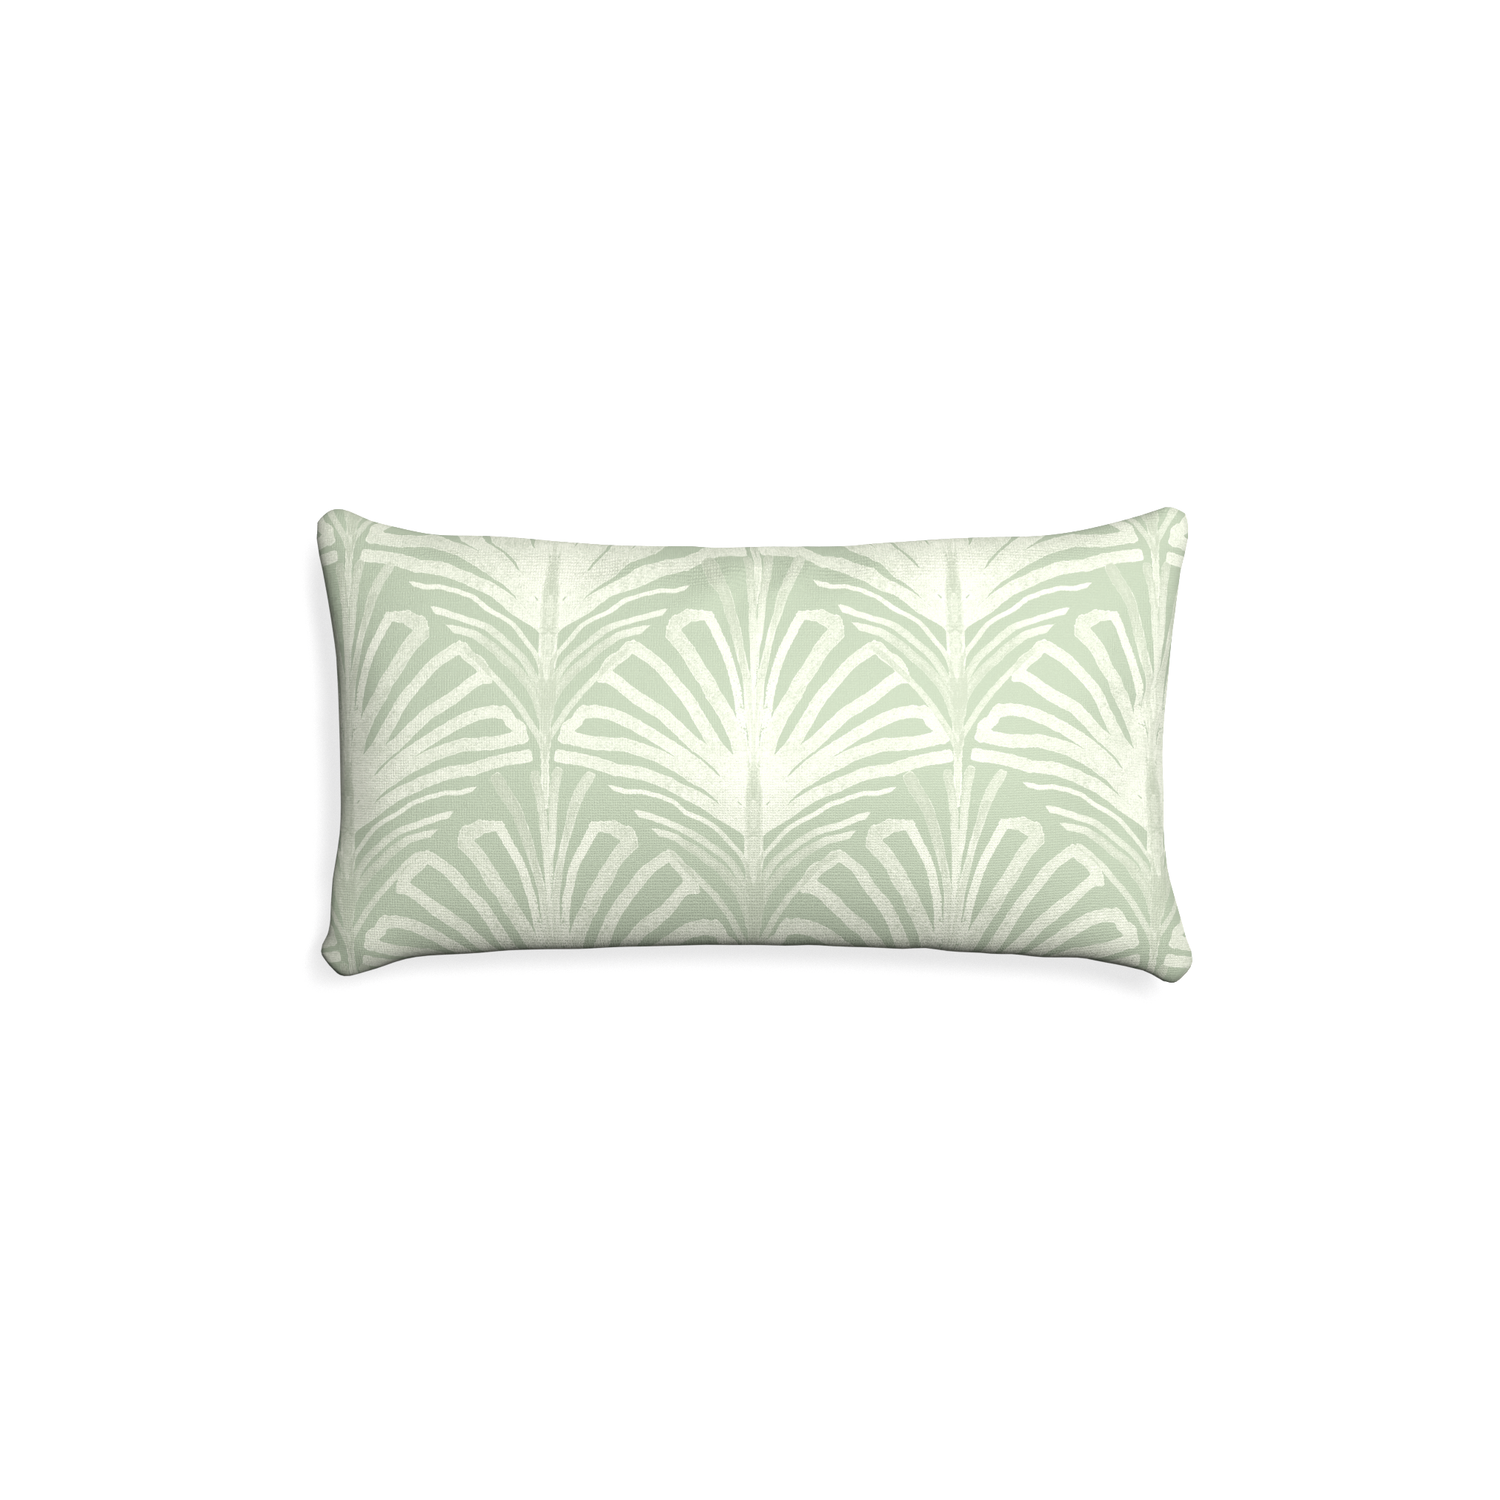 Petite-lumbar suzy sage custom sage green palmpillow with none on white background